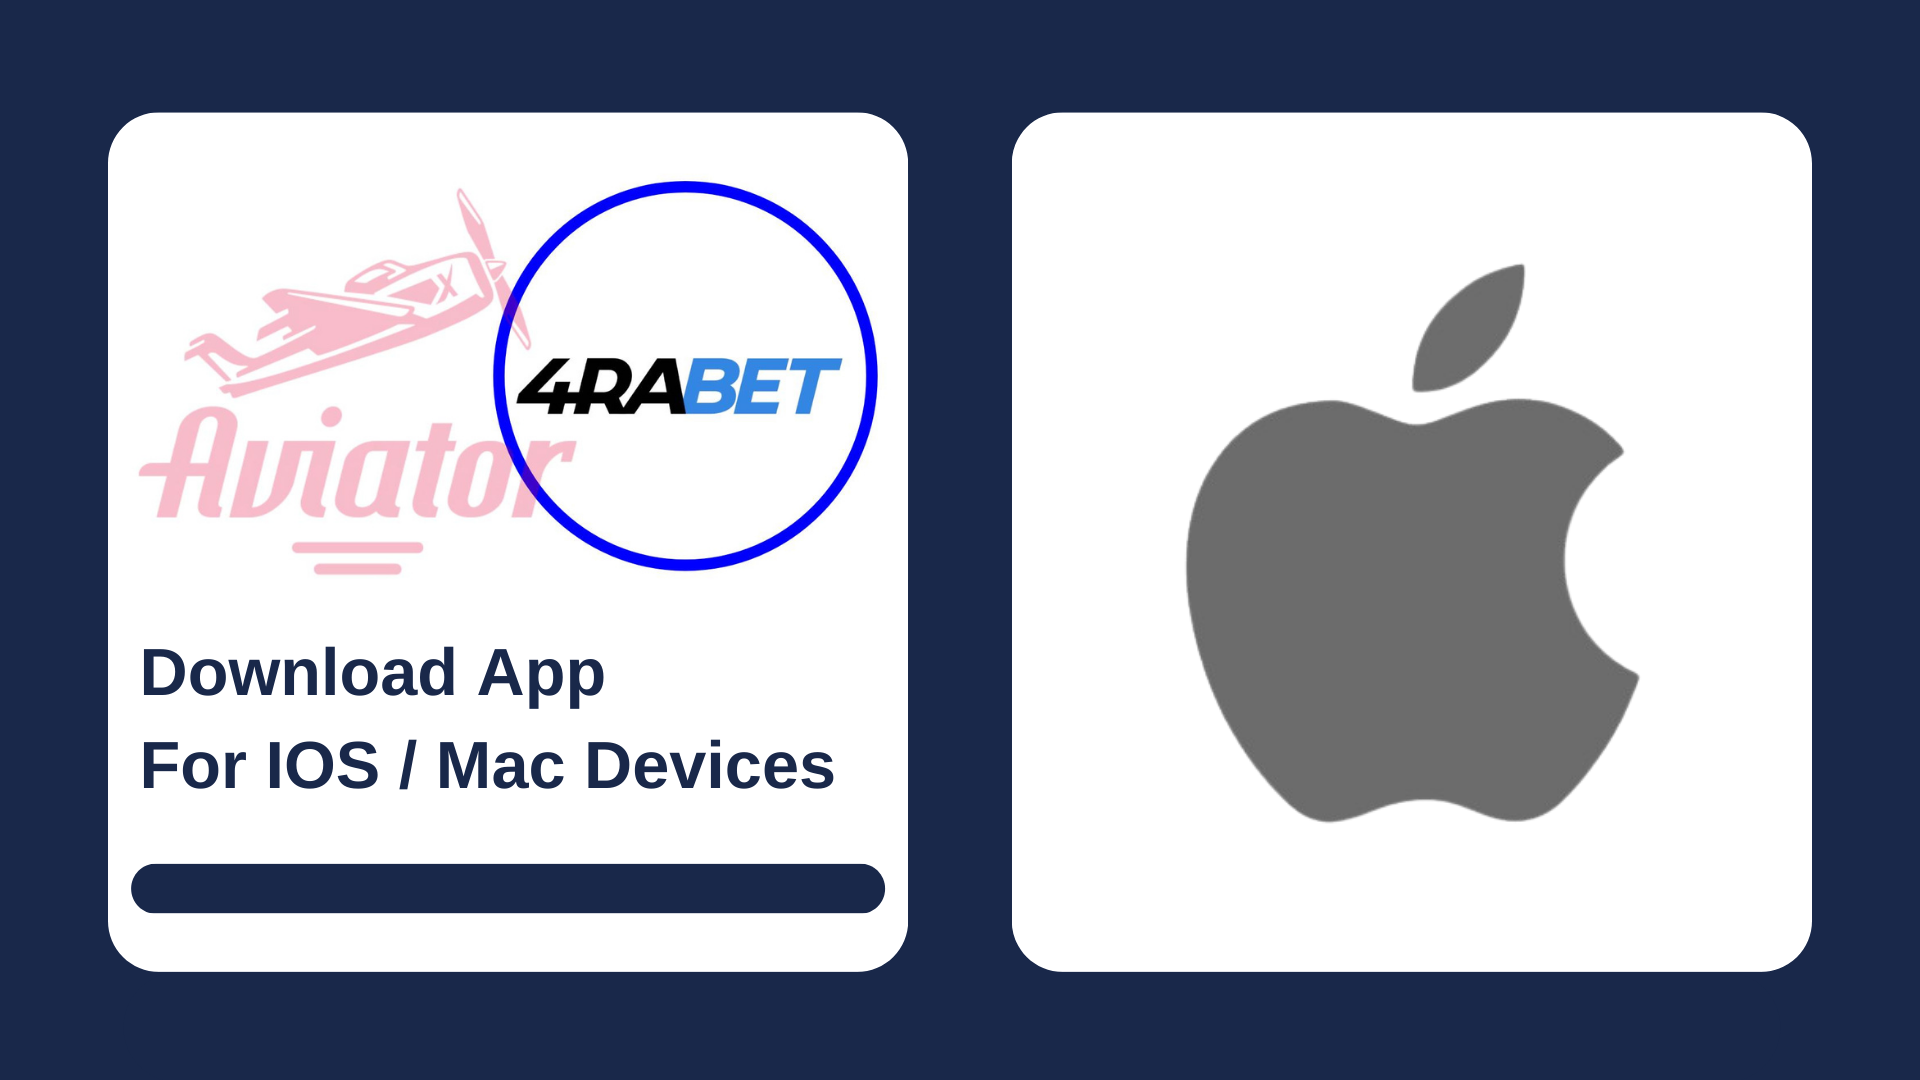 First picture showing Aviator and 4rabet logos with text, and second - IOS icon